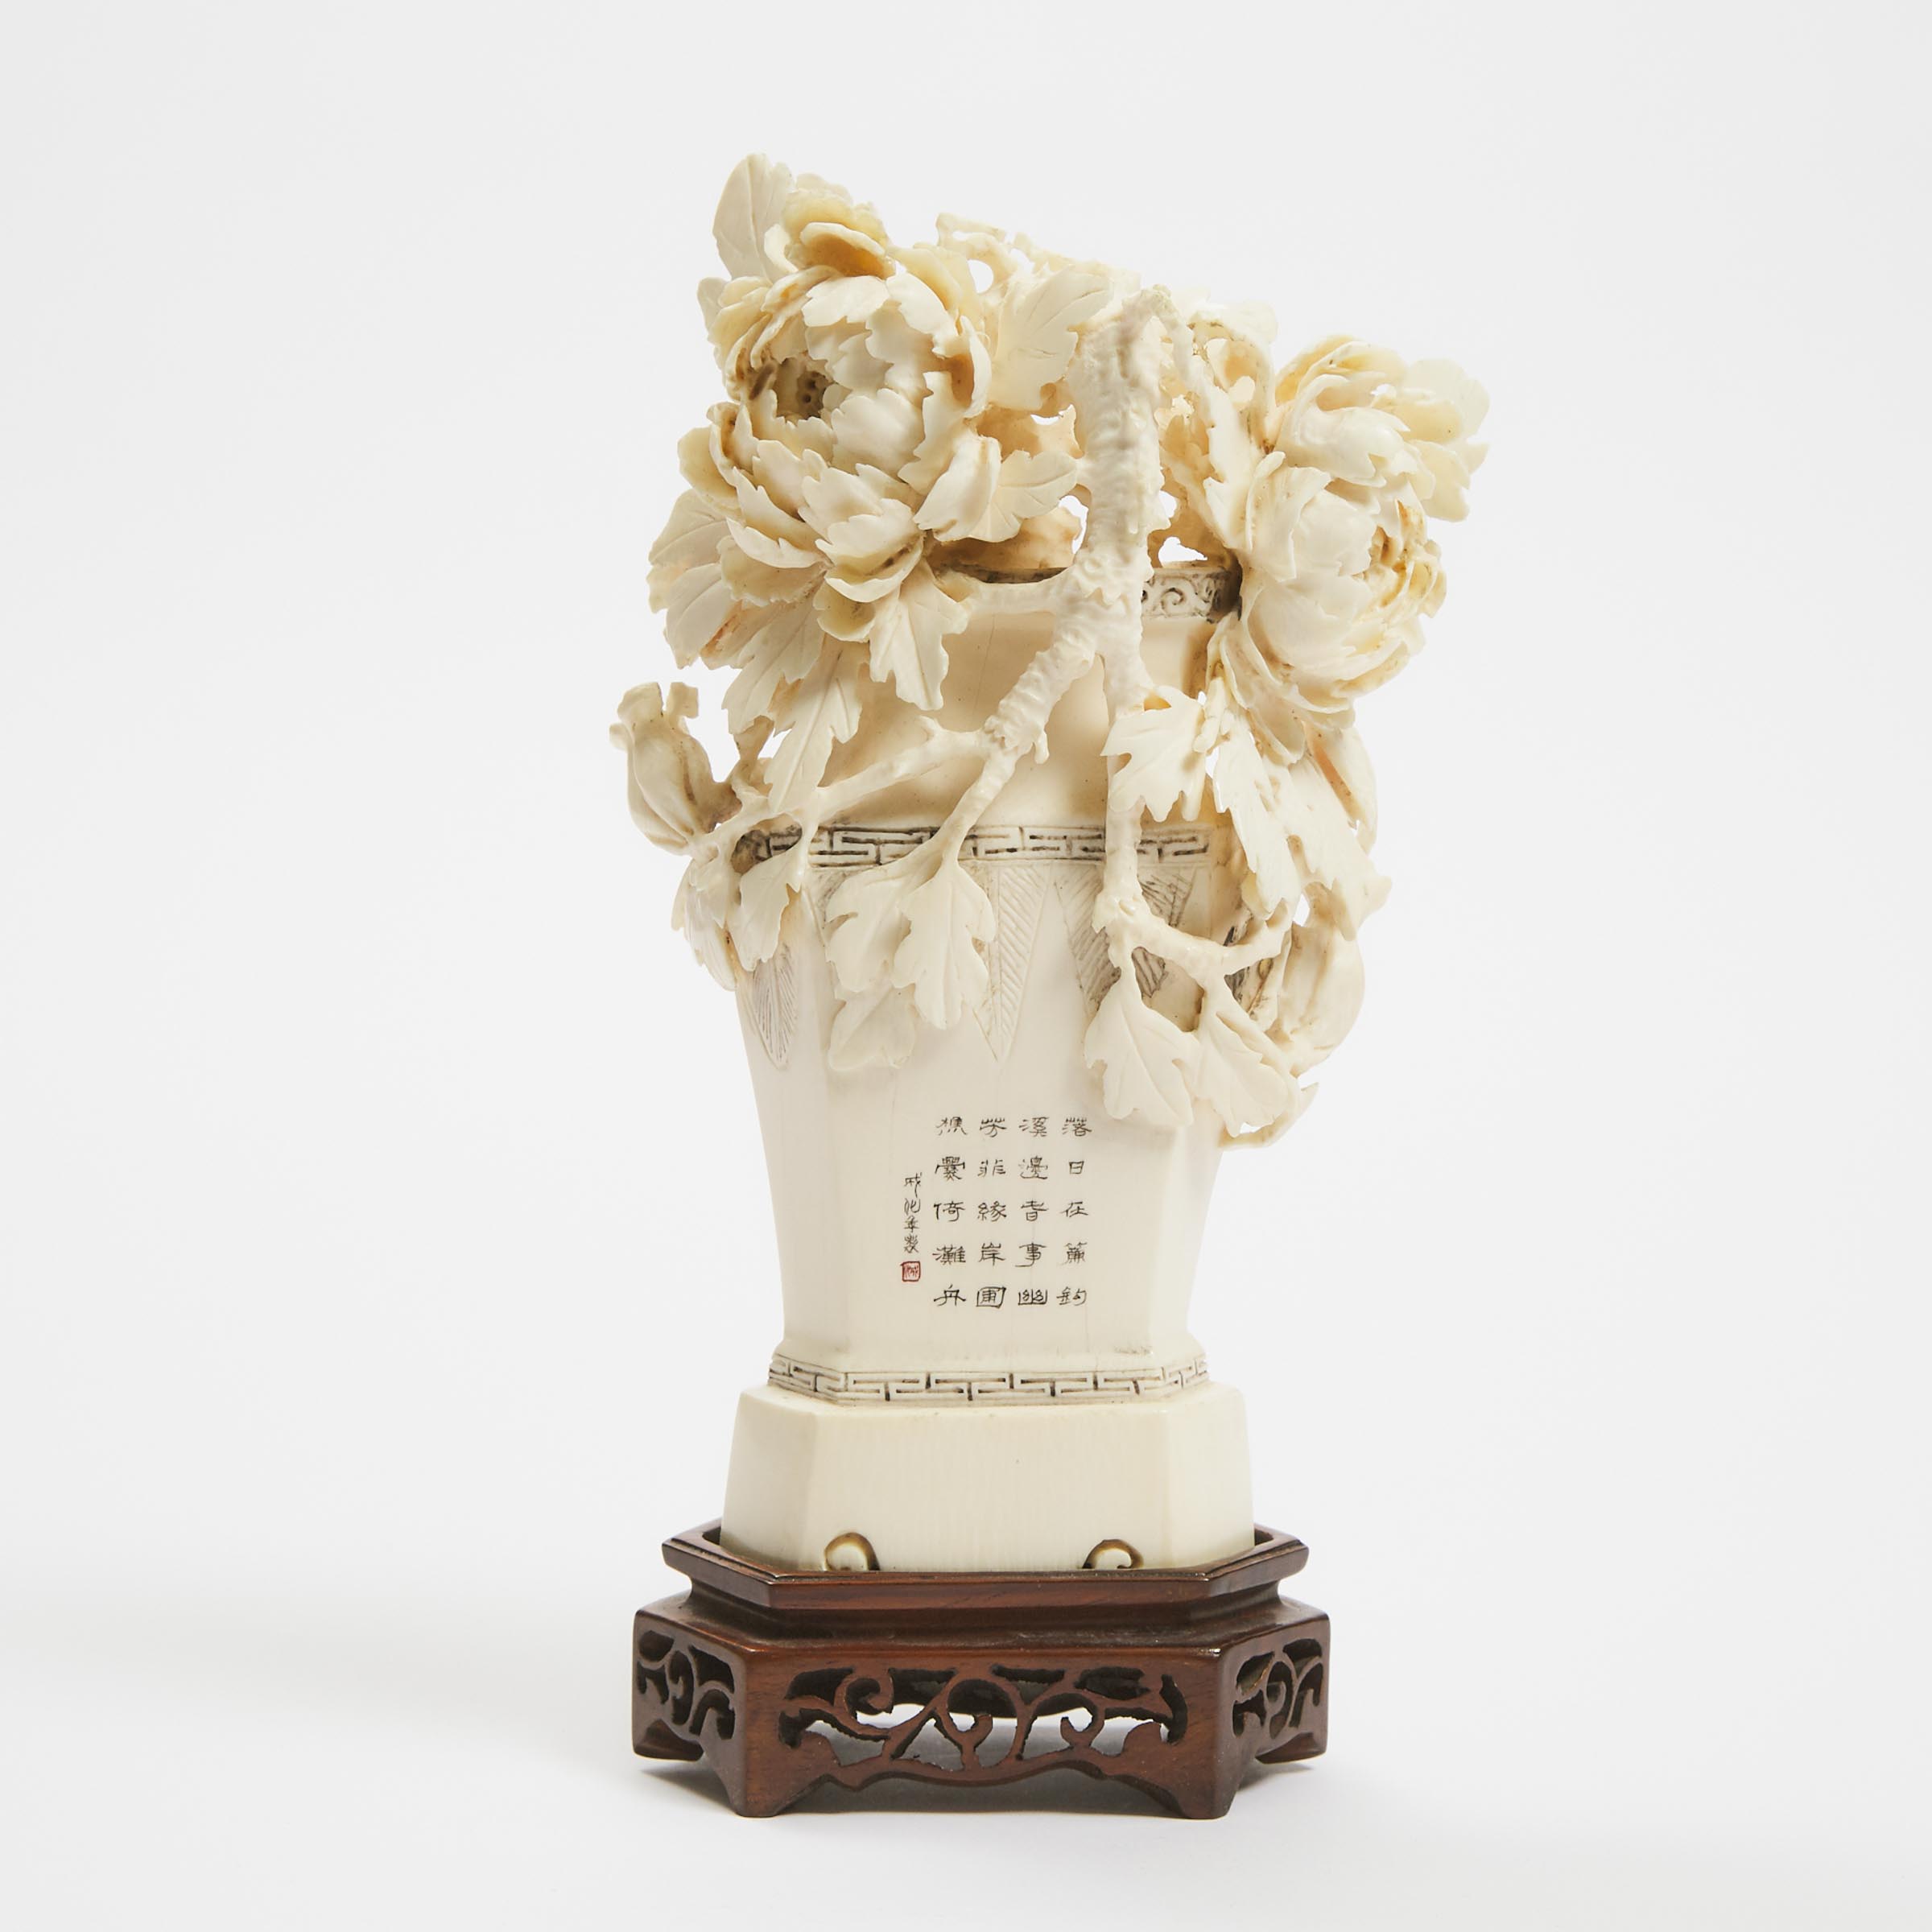 A Carved Ivory Peony Vase, Early to